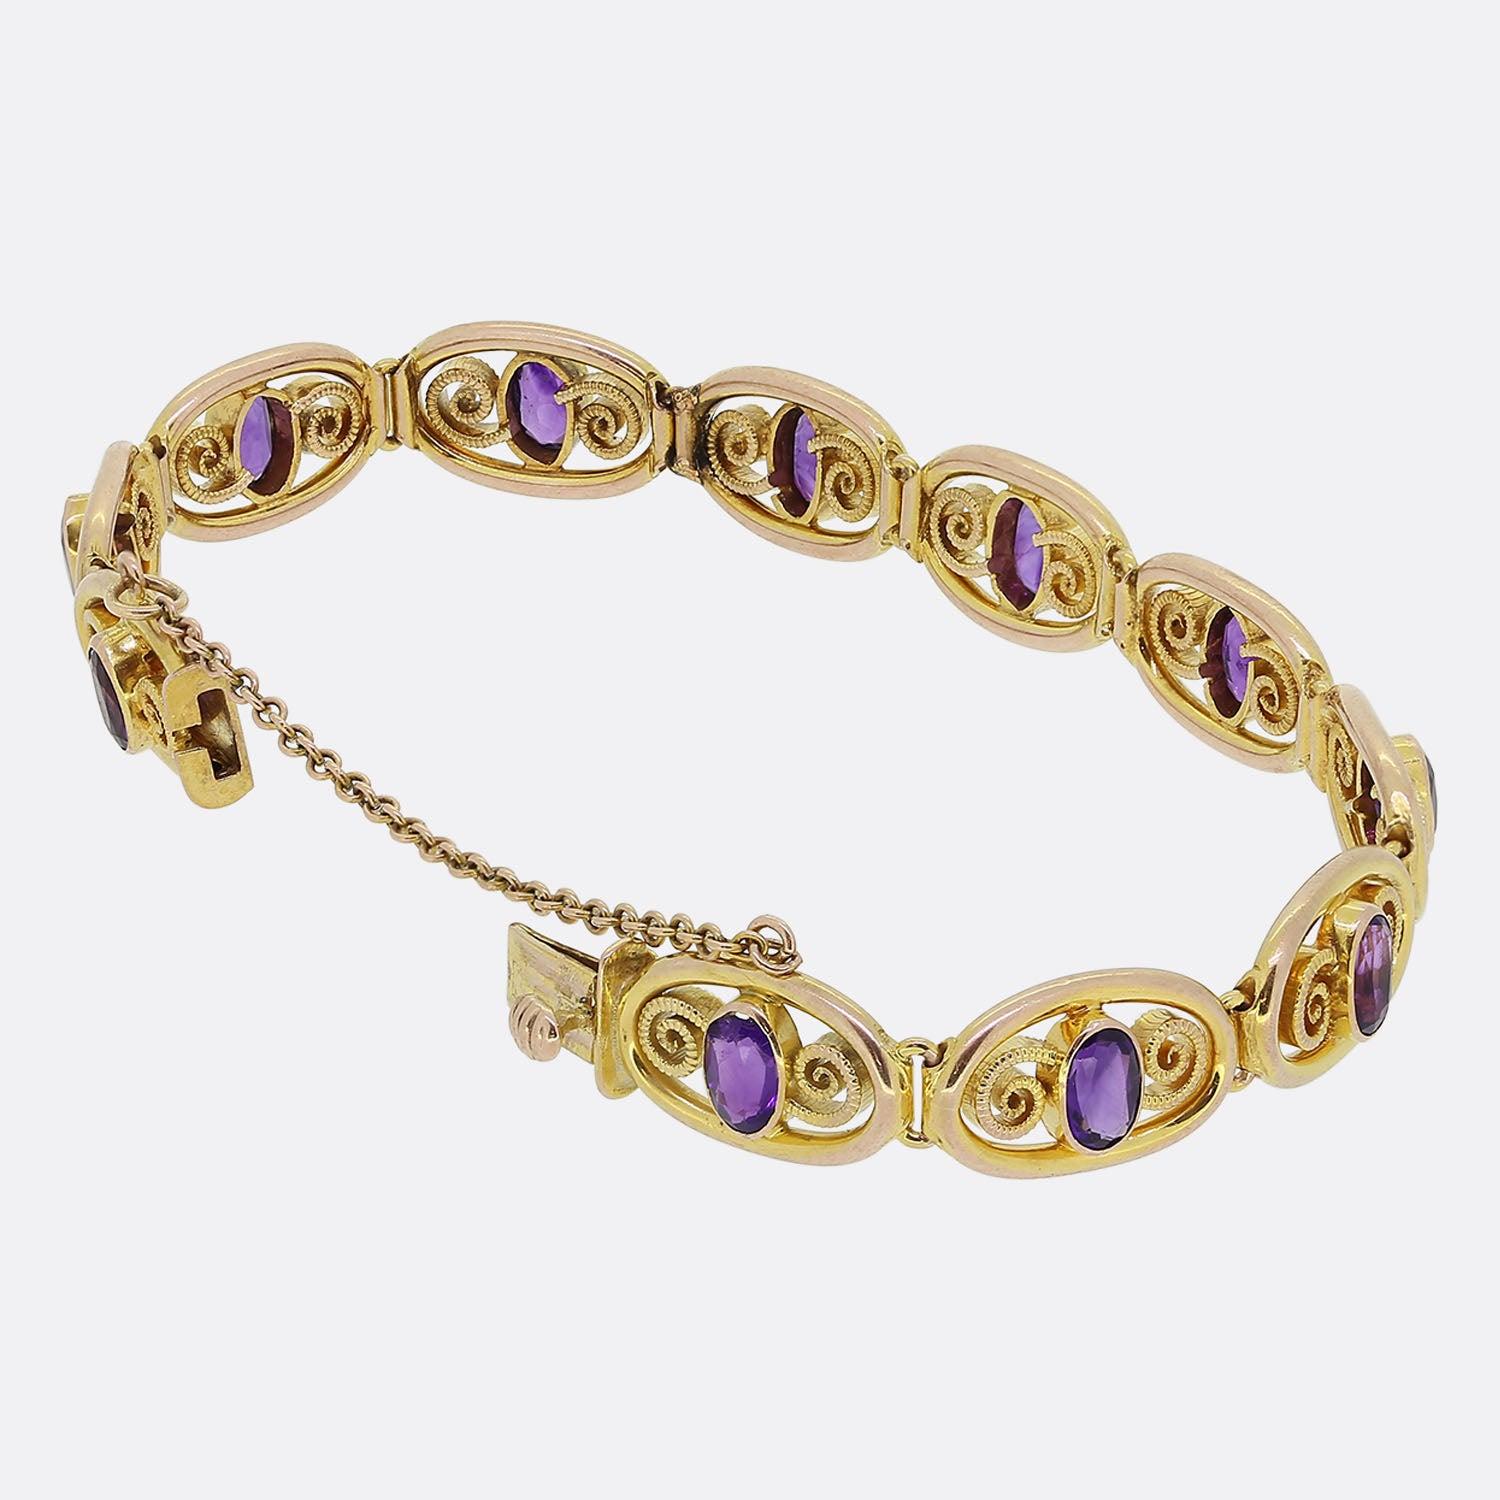 Here we have lovely vintage piece from Murrle Bennett & Co. This bracelet's open frame is comprised of multiple oval shaped links, each playing host to a single bezel set oval shaped amethyst flanked on either side by a beaded swirling motif.